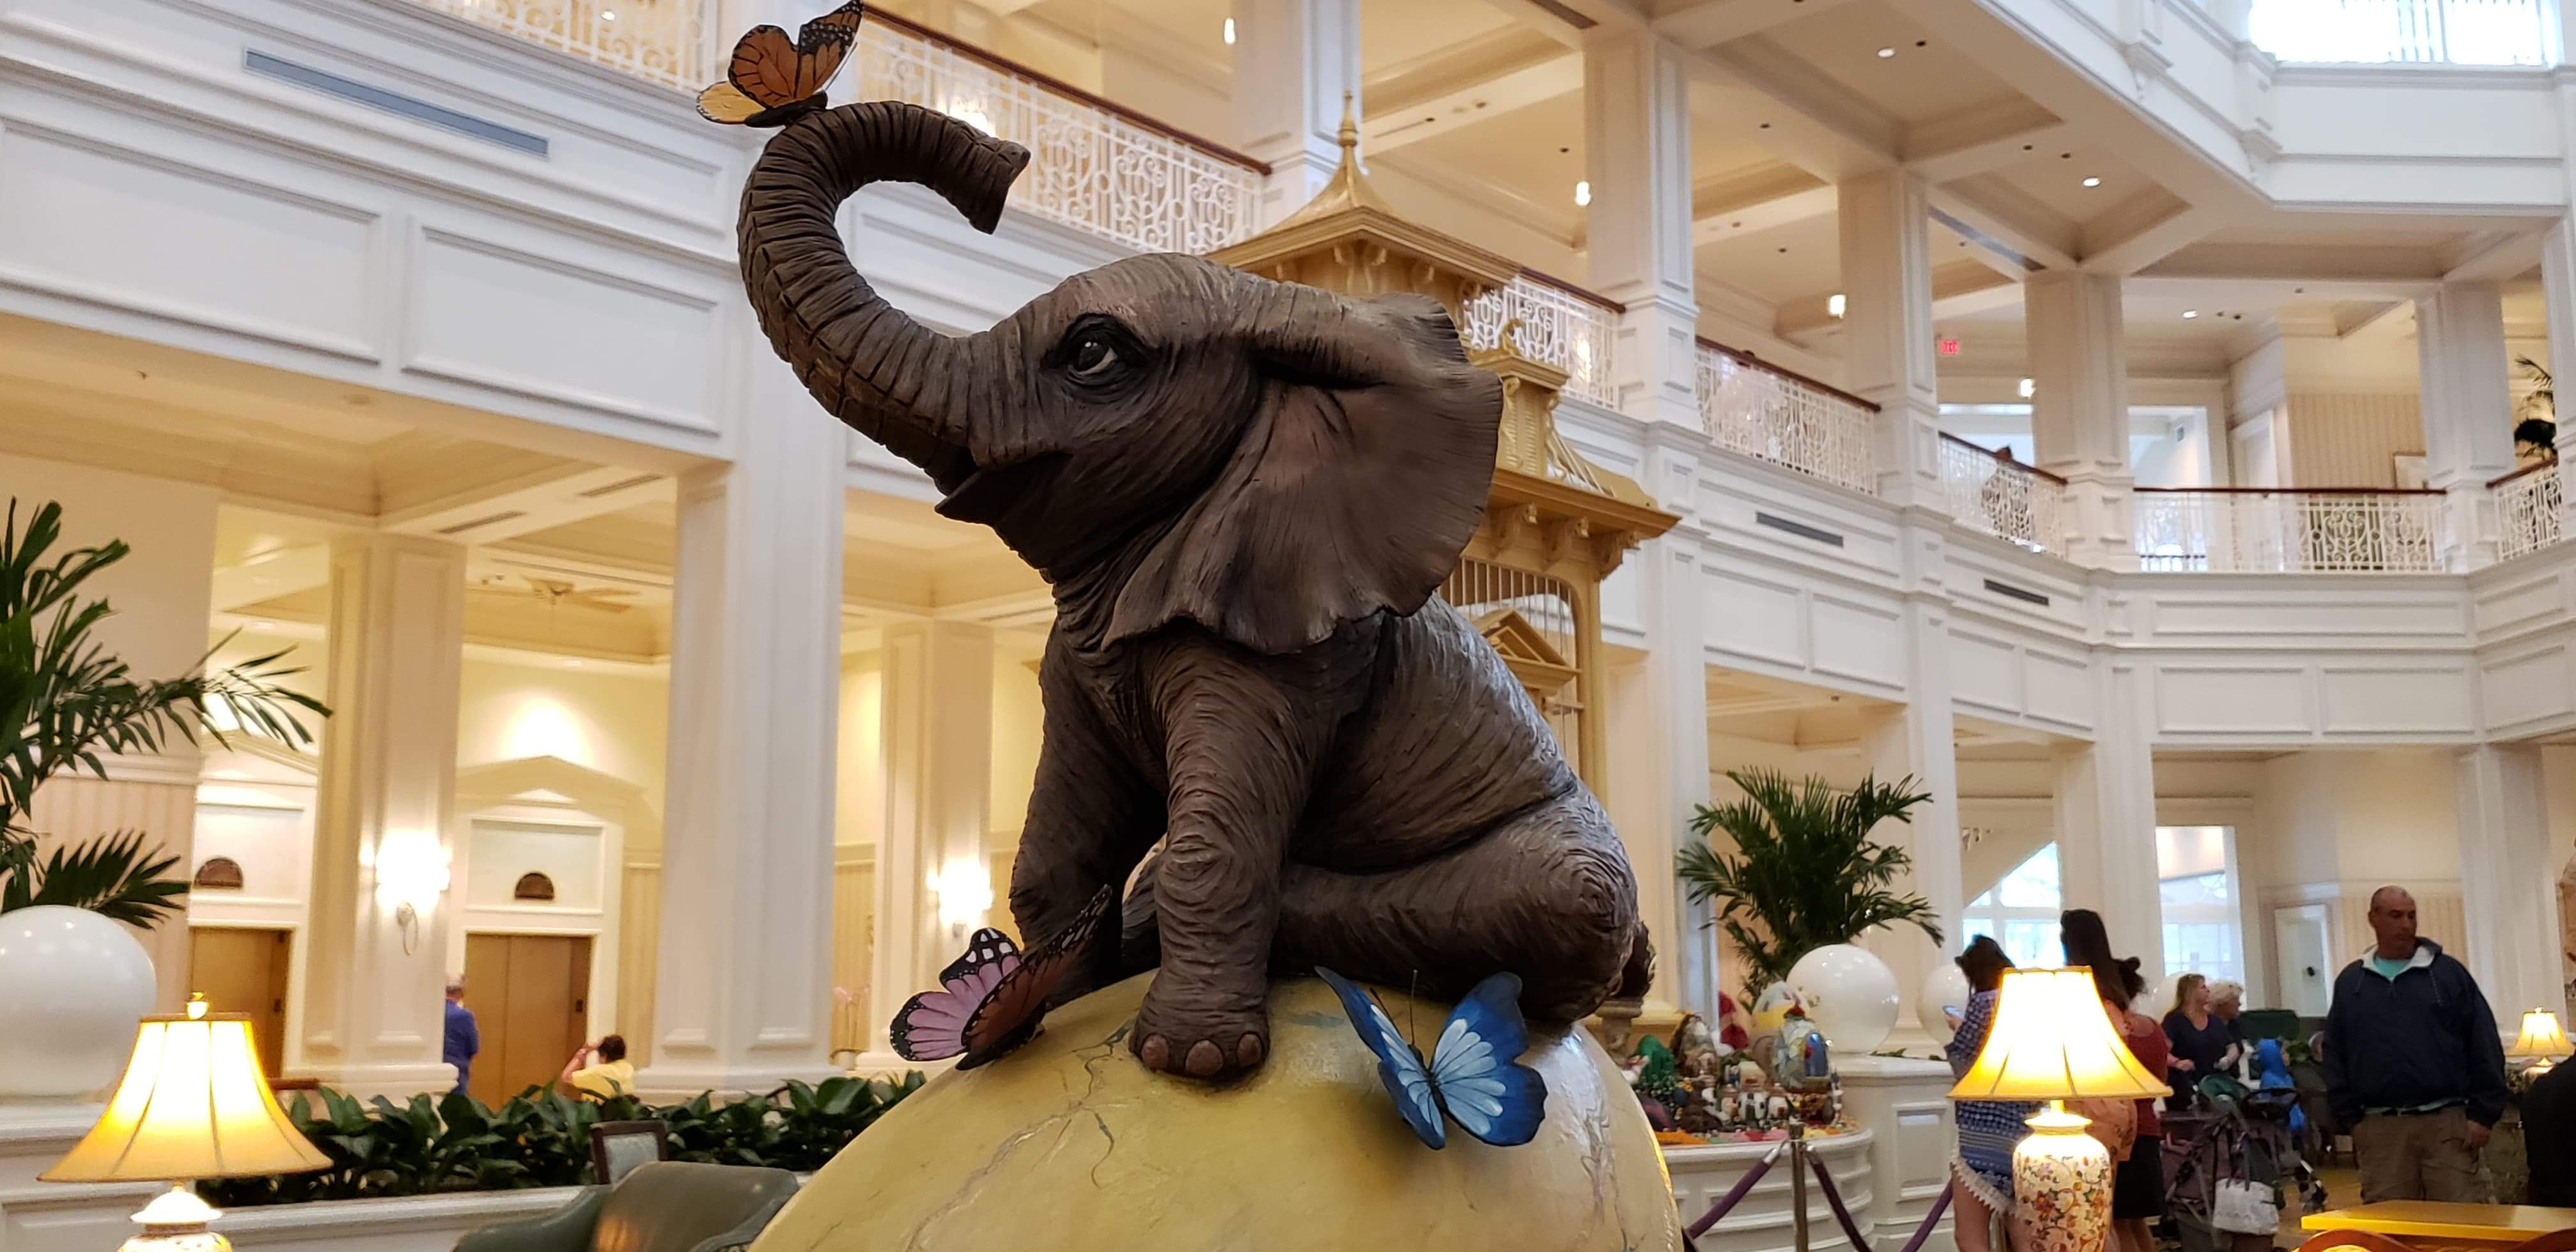 The 2019 Annual Chocolate Easter Egg Display is out at Disney’s Grand Floridian Resort